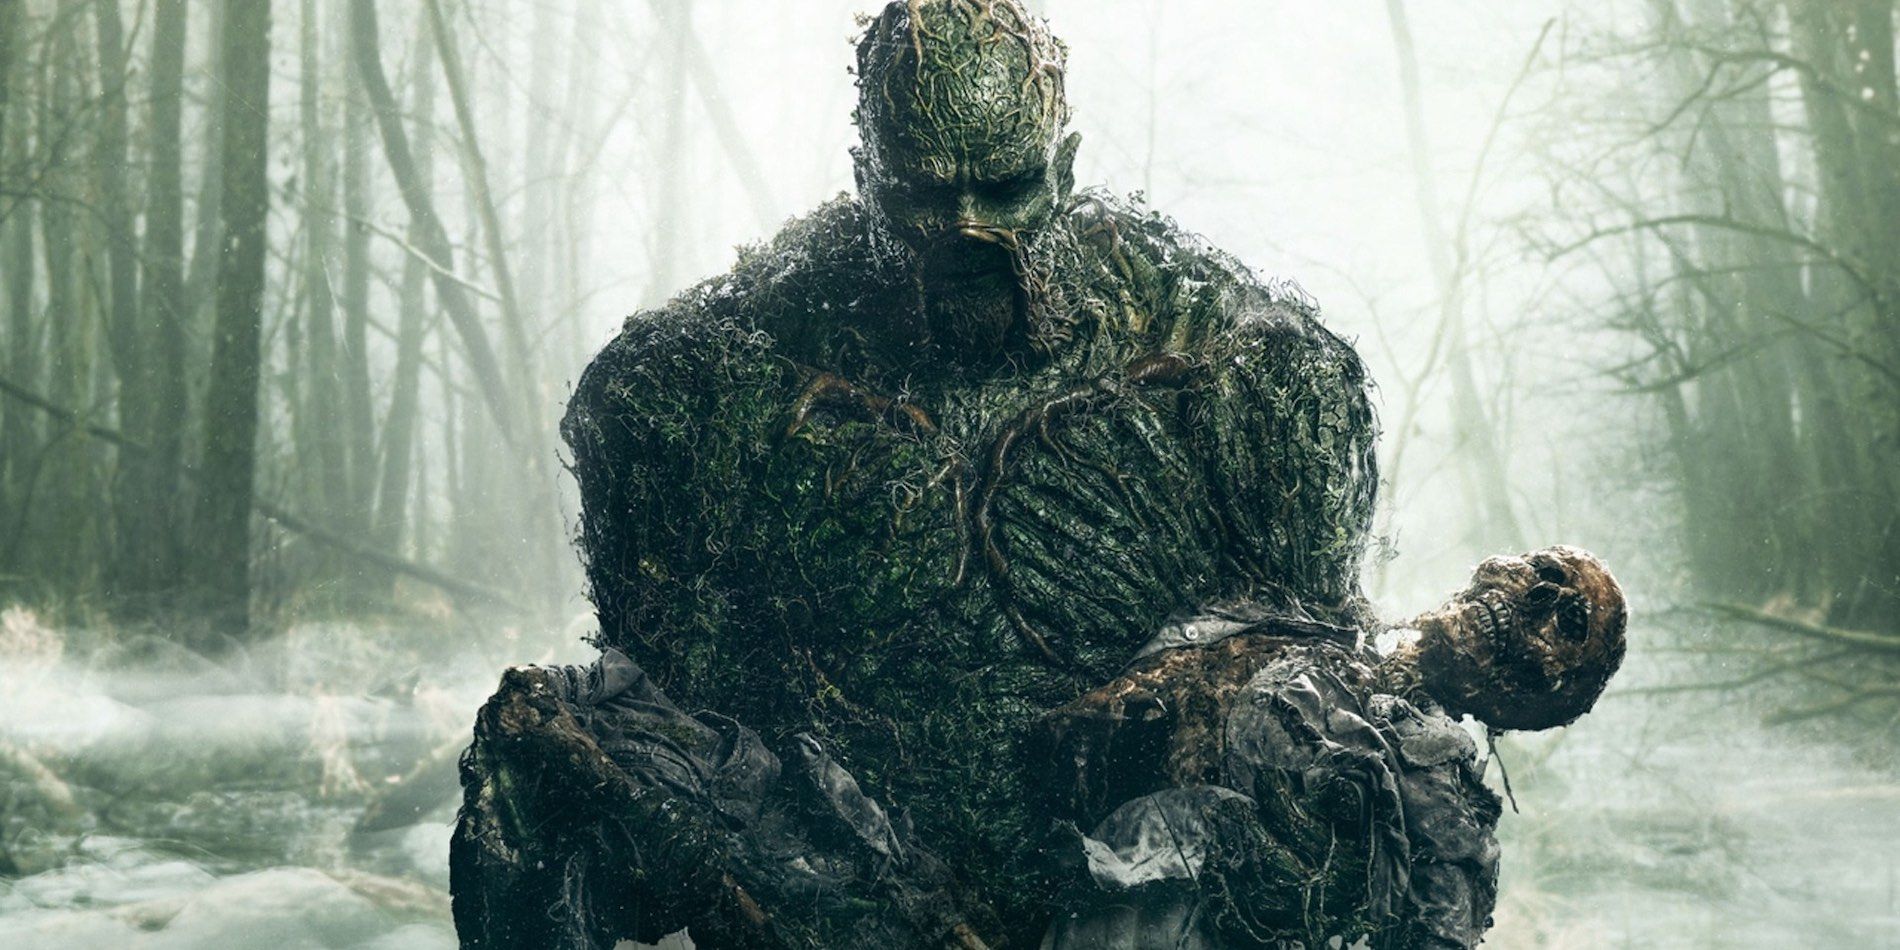 Arrowverse Confirms DC’s Swamp Thing Exists On Earth-Prime After Crisis